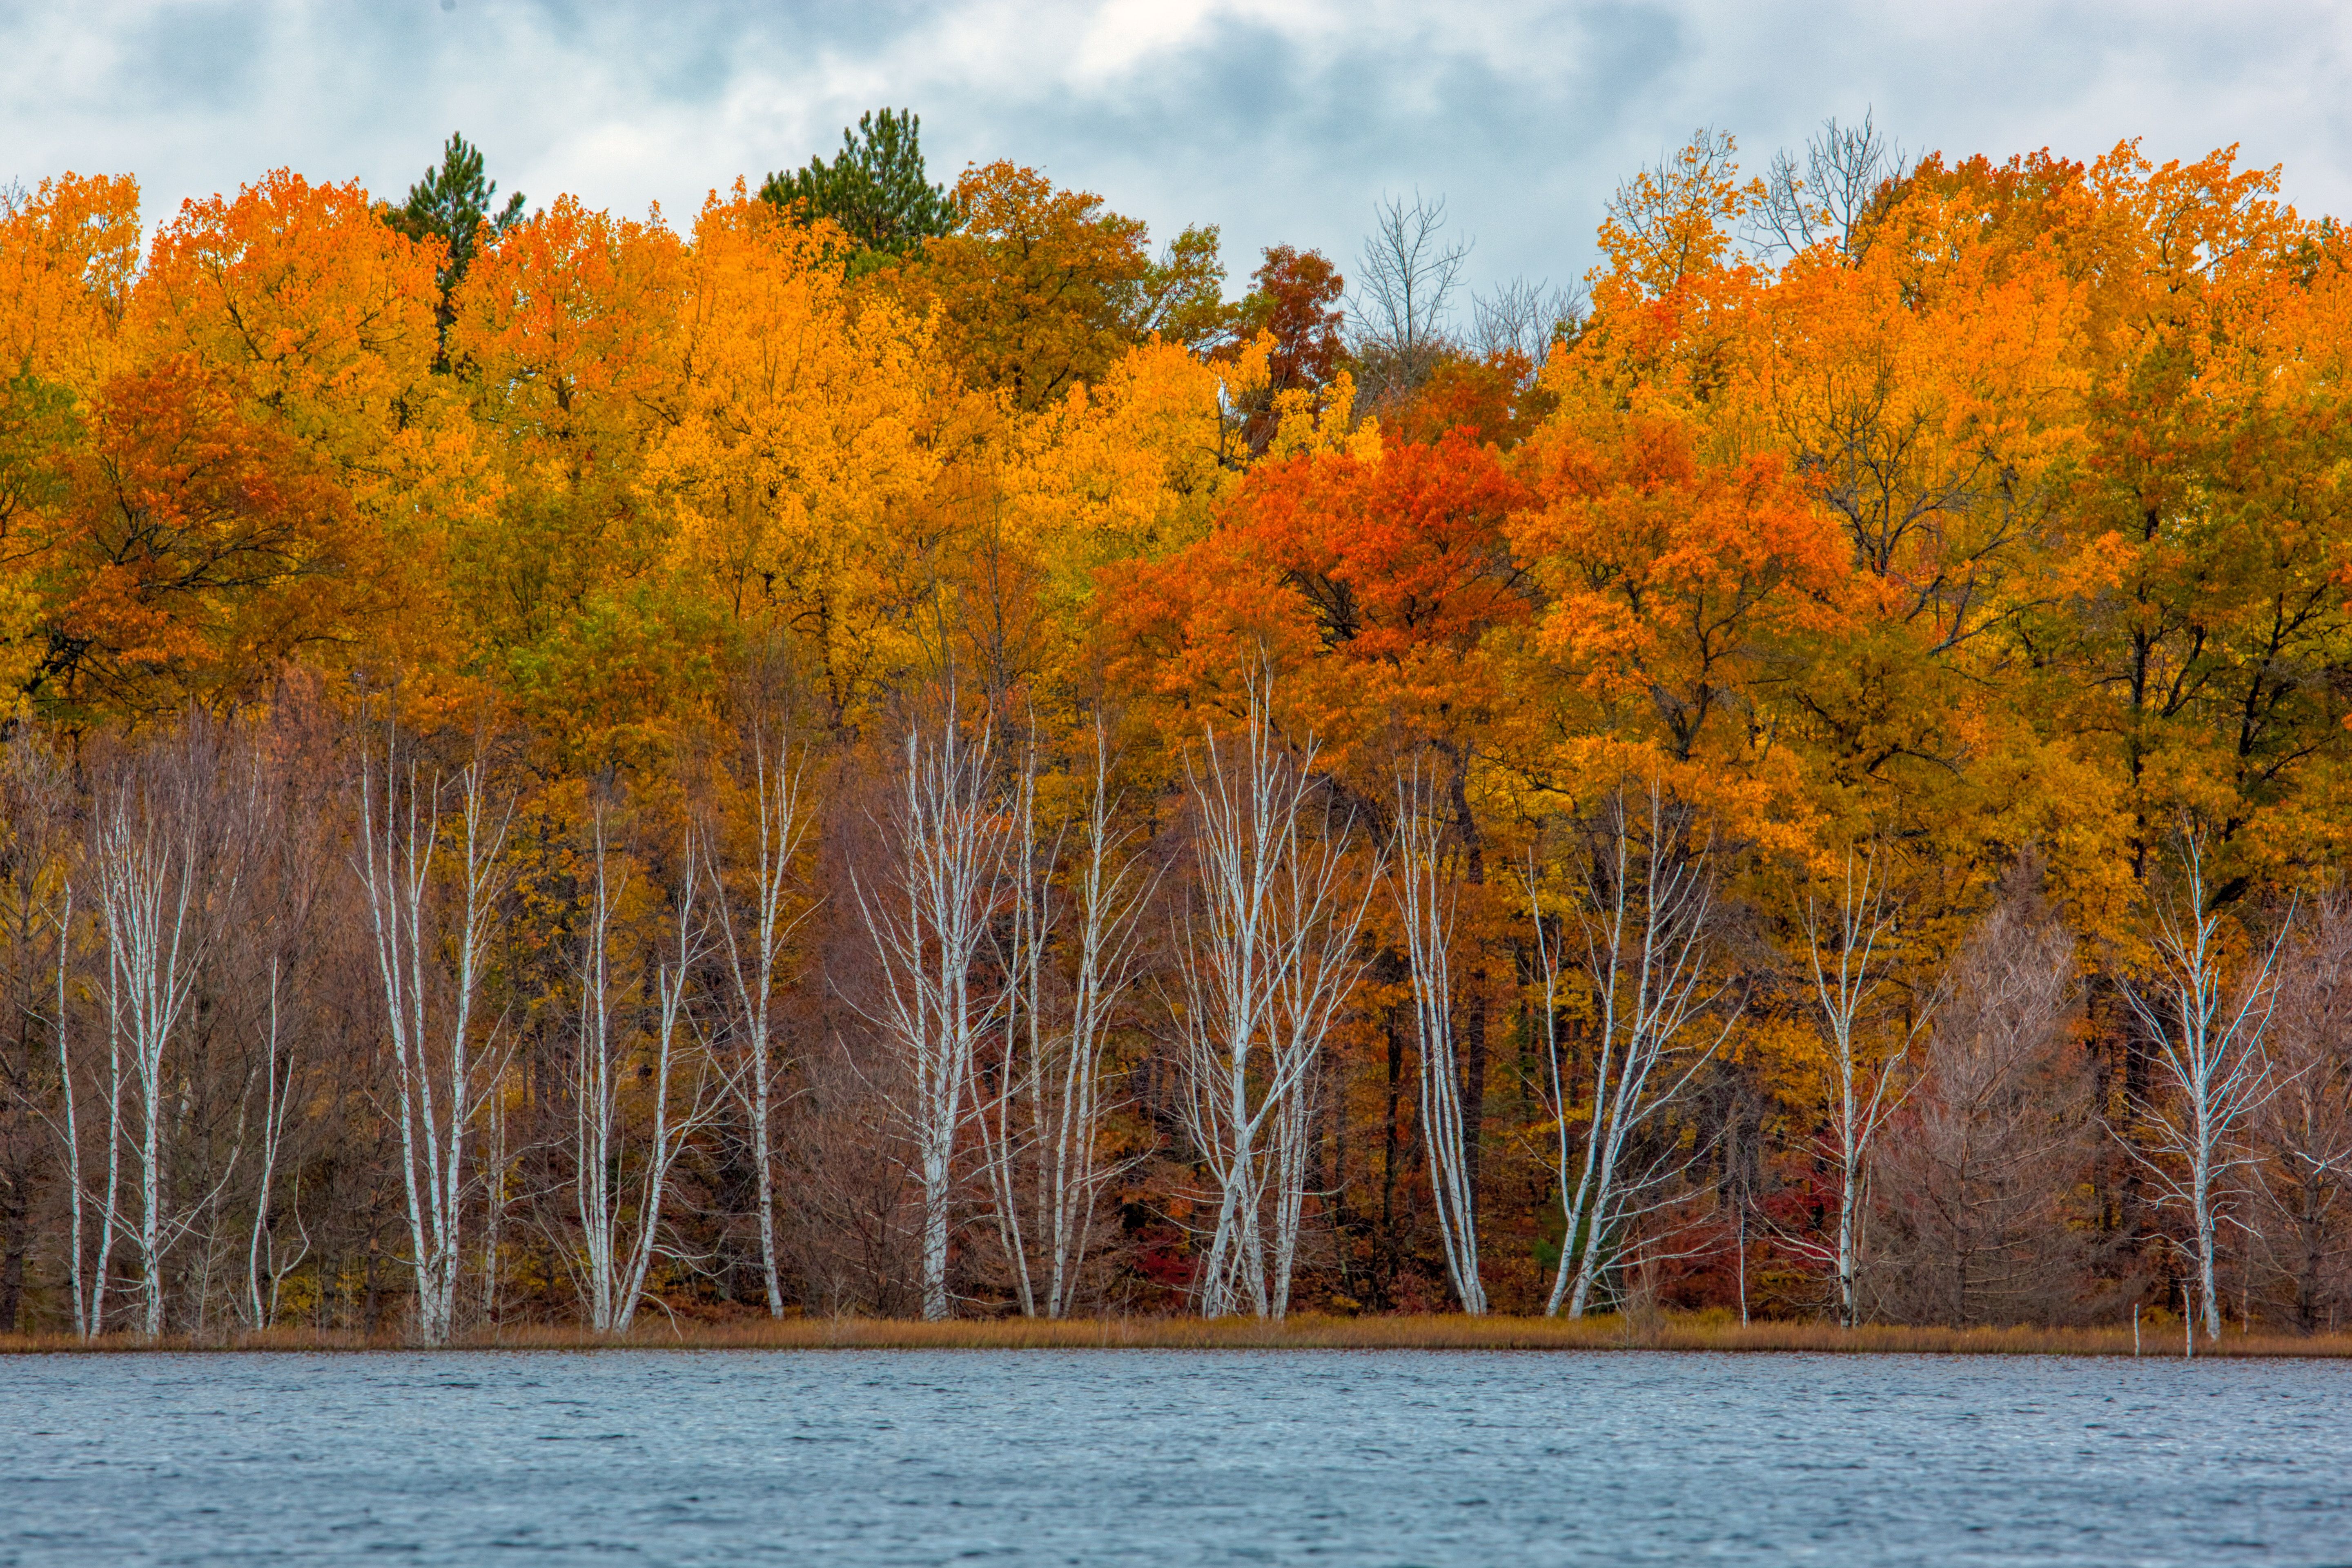 An image of a Wisconsin lake surrounded by woods in autumn. The colors include a blue stream, green ground-cover and aquatic plant life, and orange, yellow, green and gold foliage on the trees.